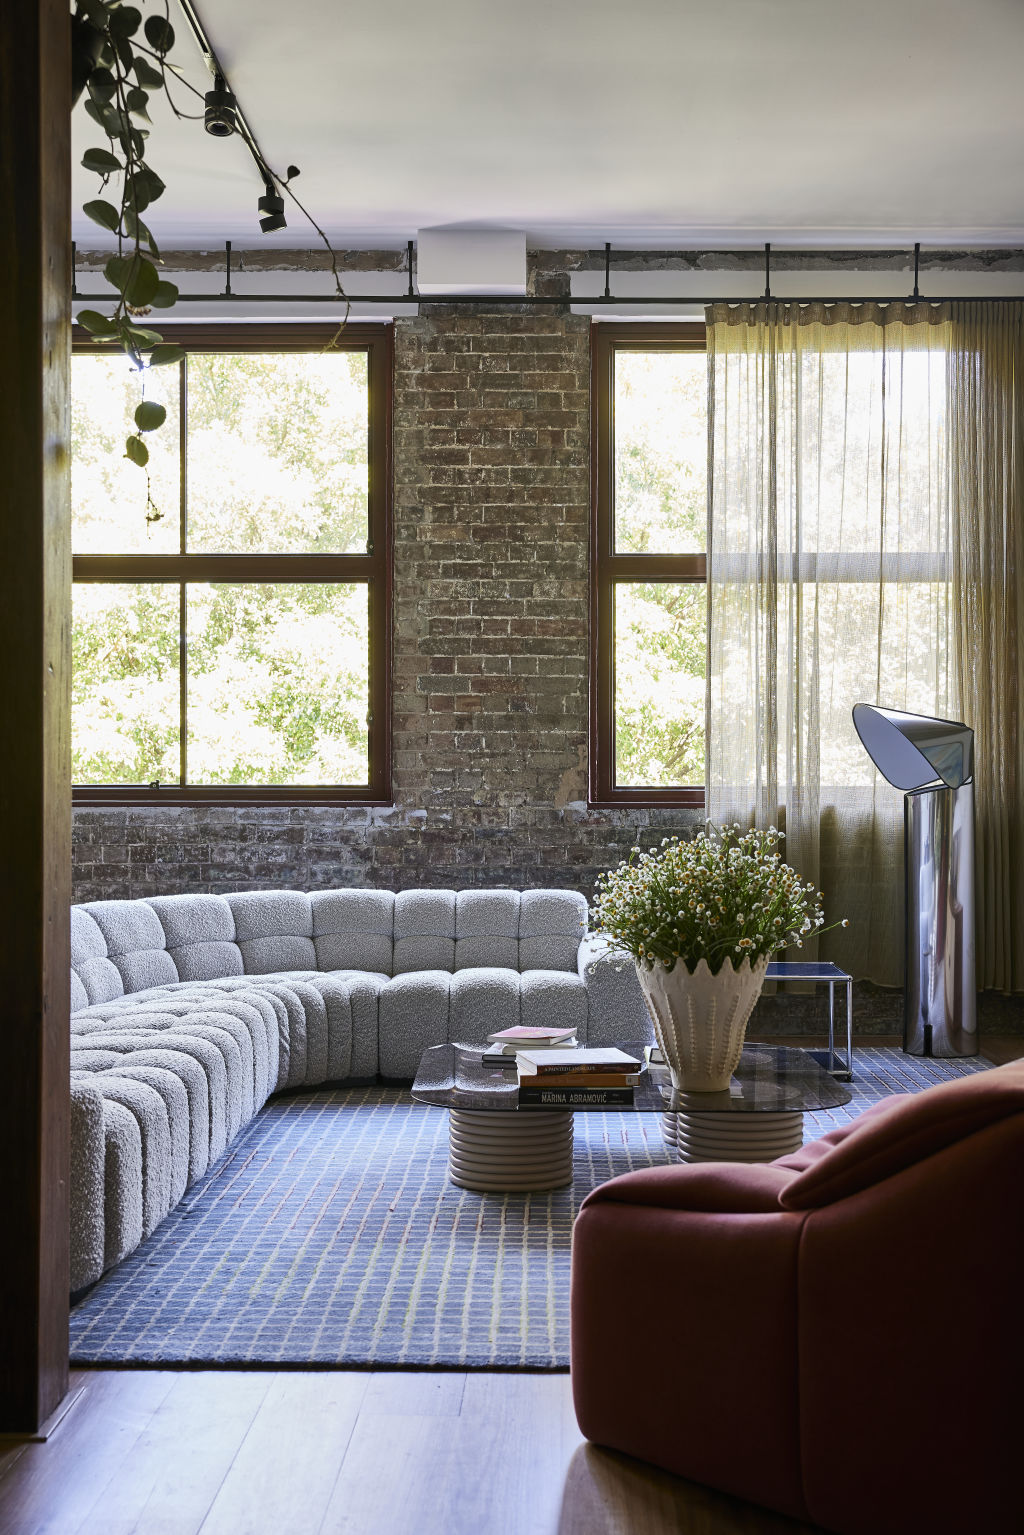 The renovation brought much-needed light into the space. Photo: Pablo Veiga